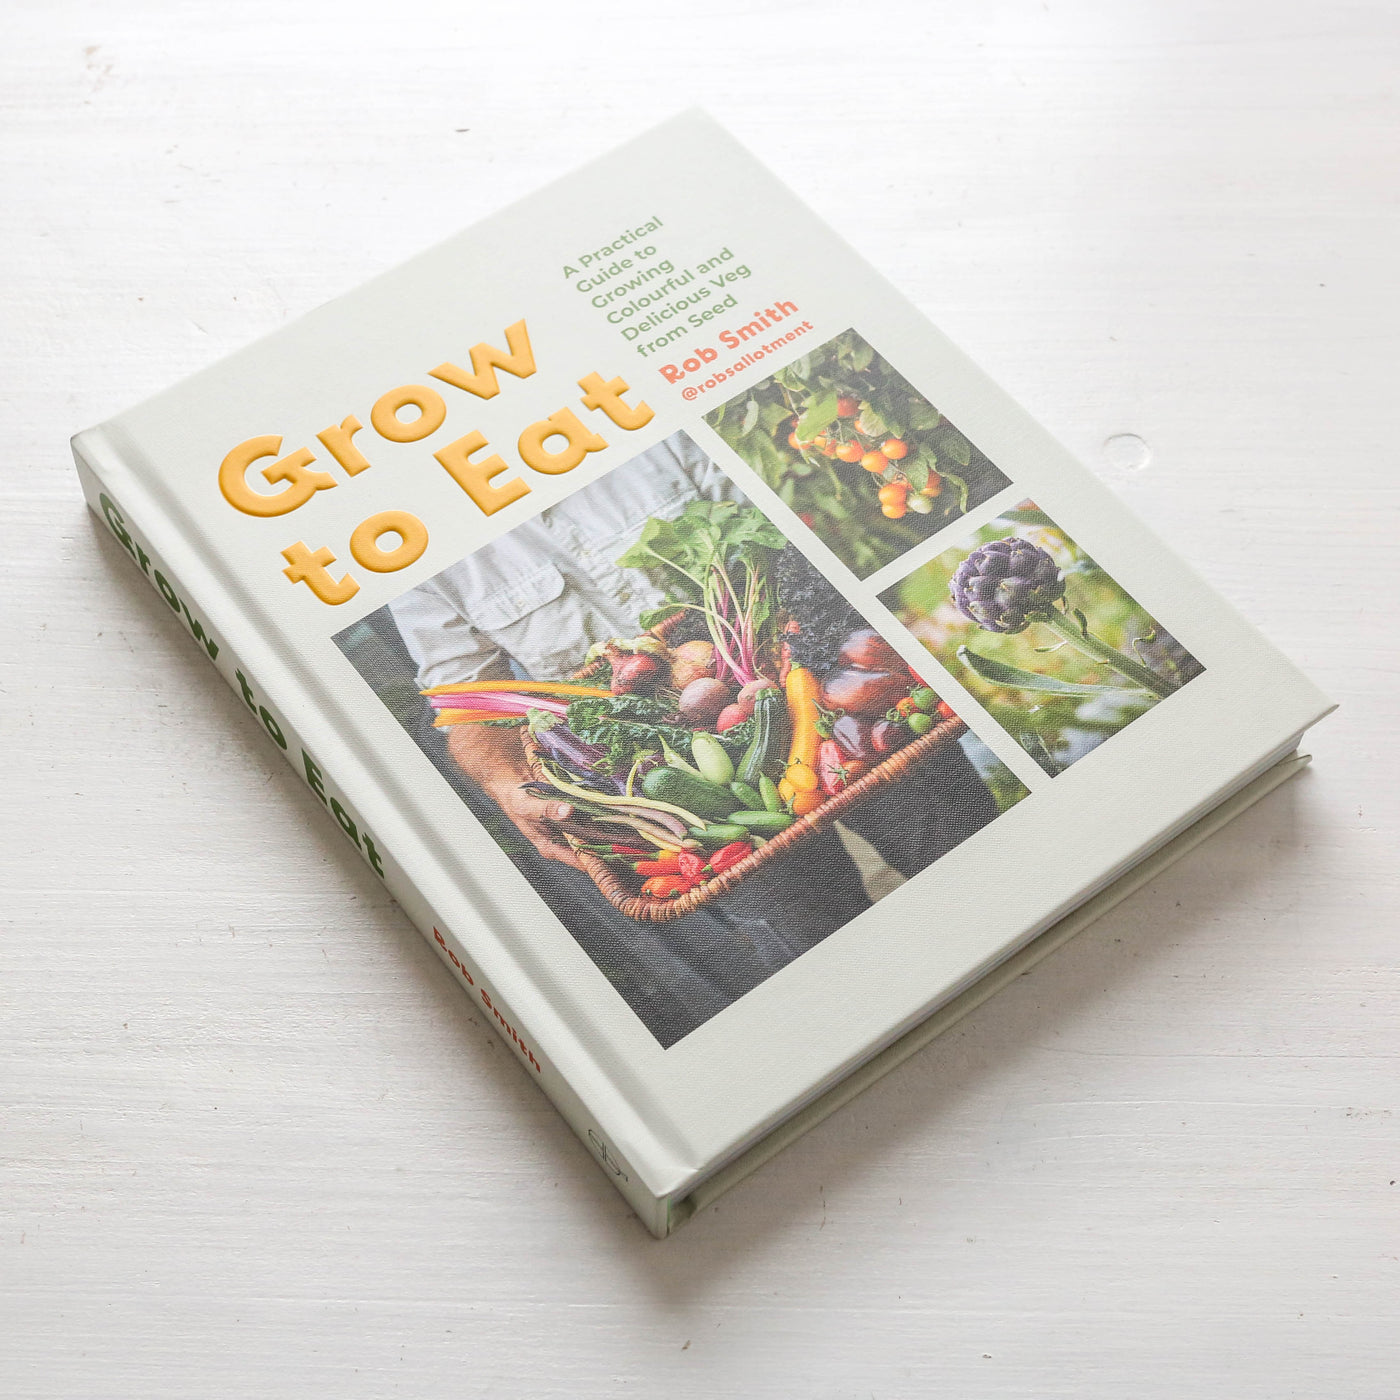 Grow to Eat : Growing Colourful And Tasty Vegetables From Seed